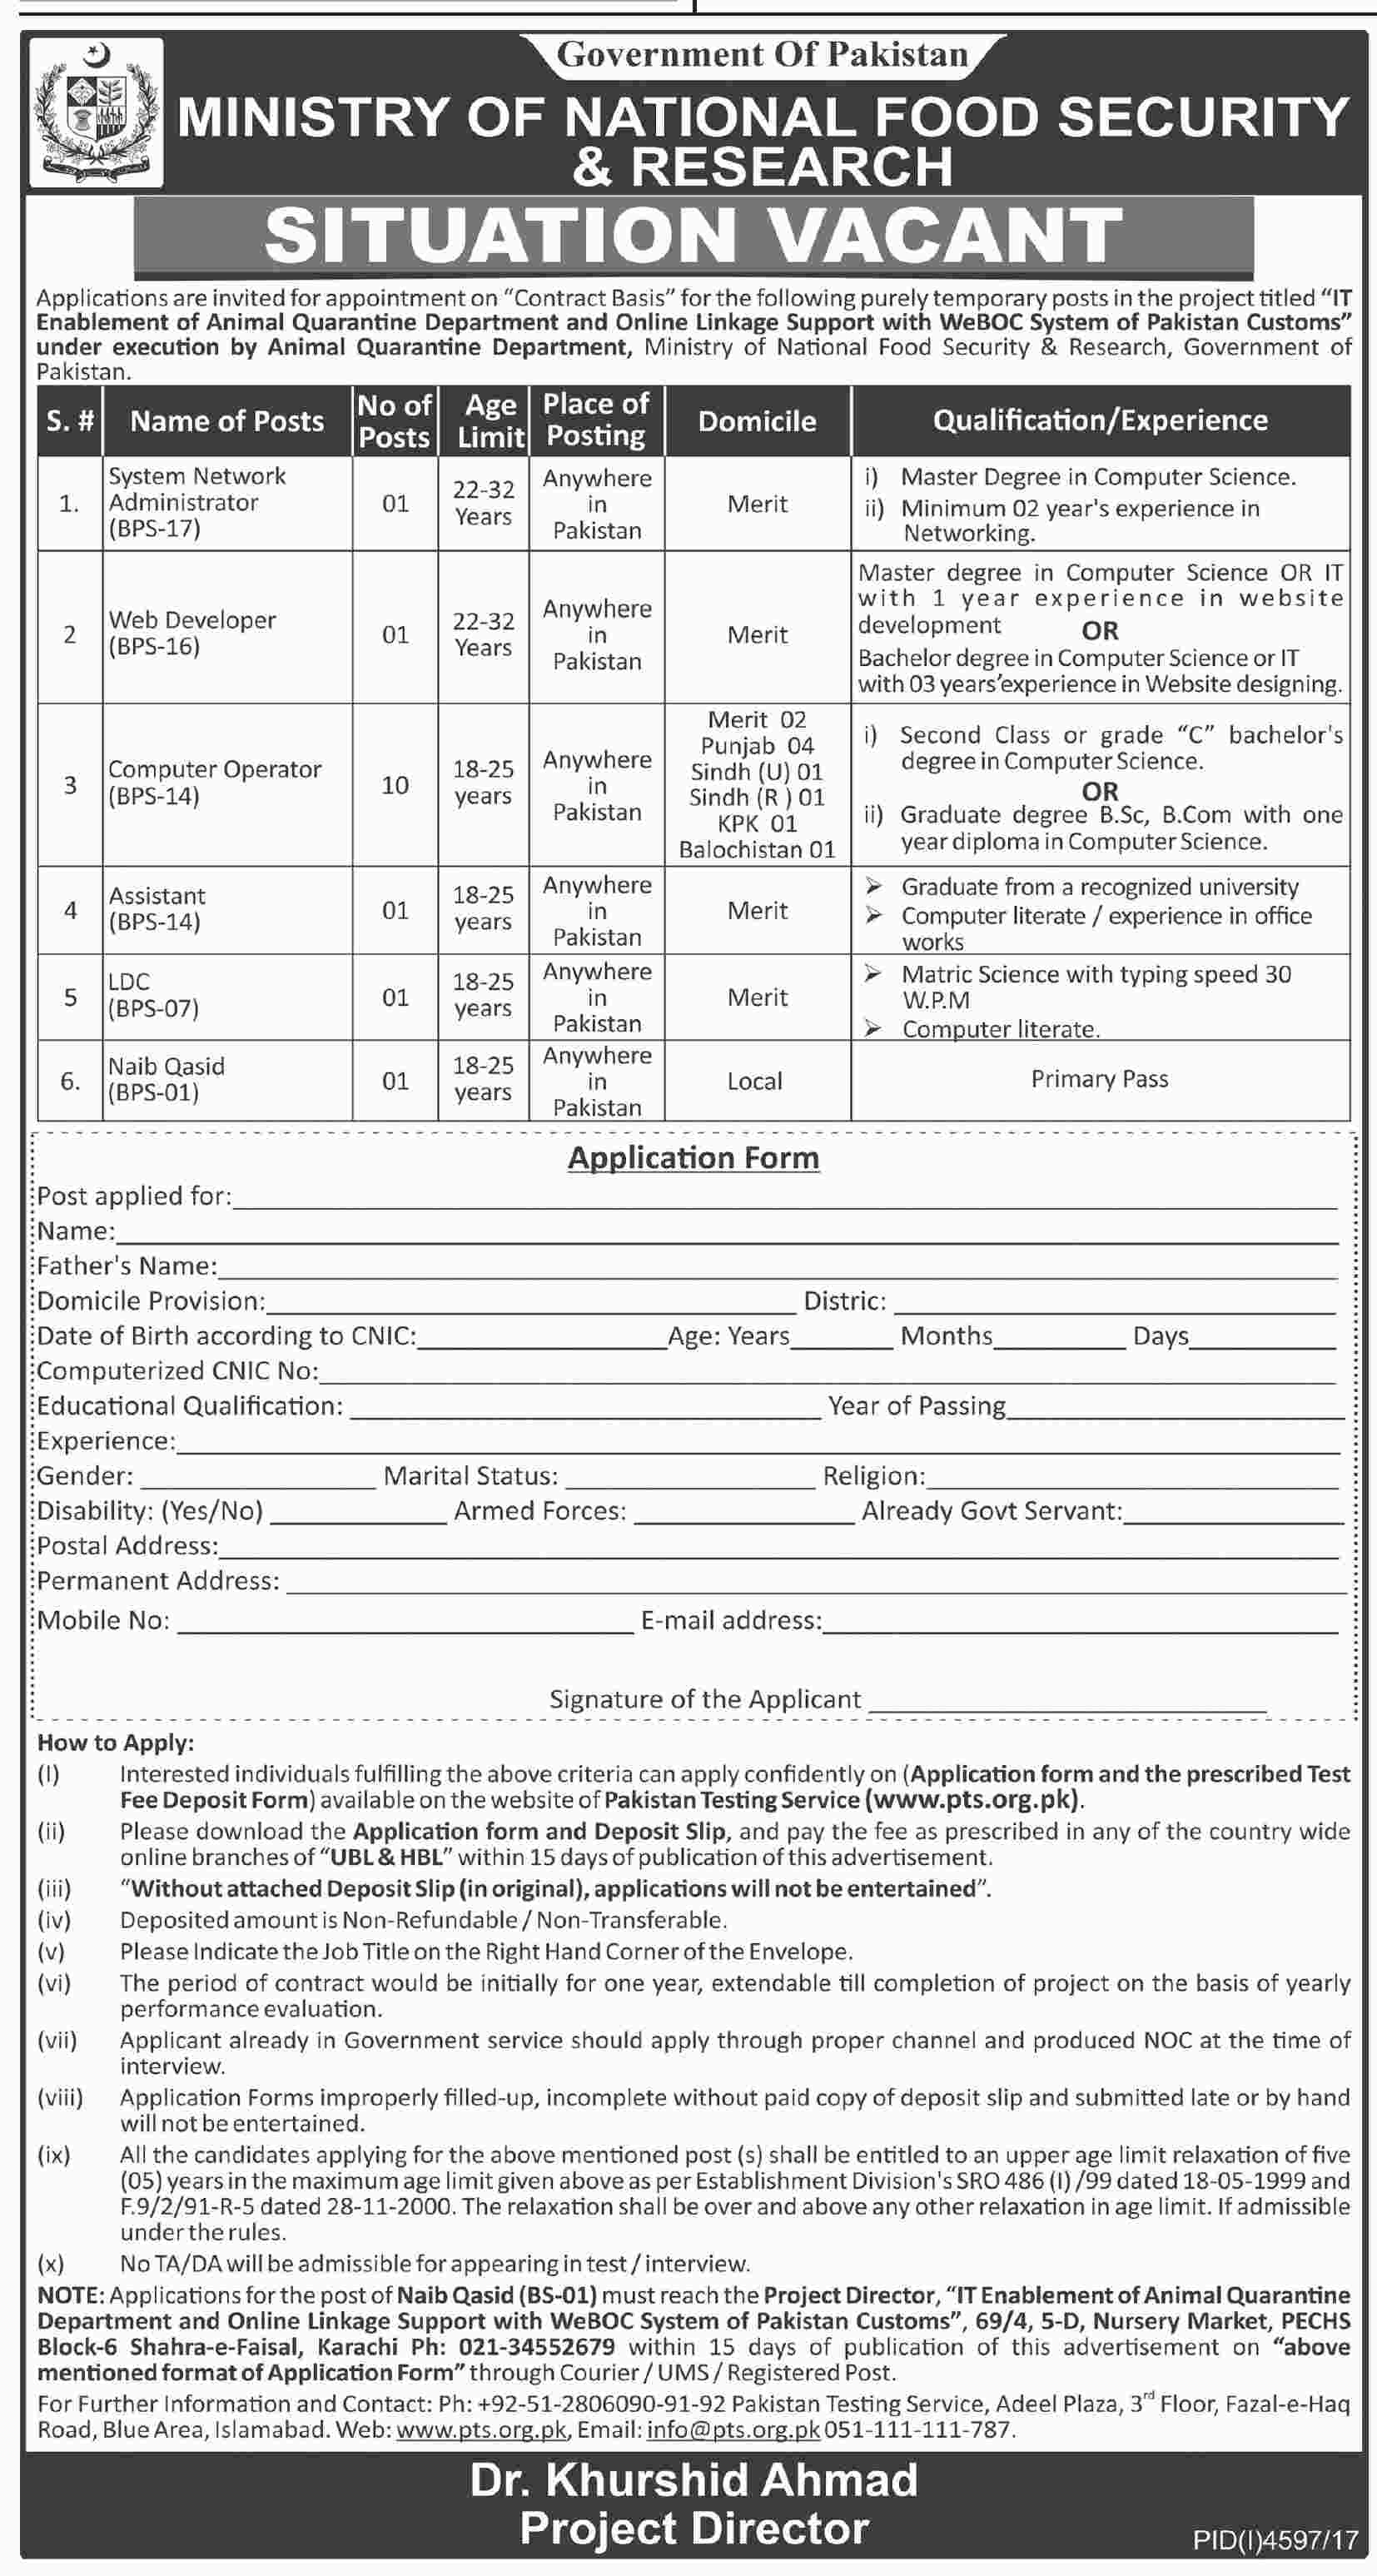 Jobs in Ministry of National Food Security and Research 25 Feb 2018